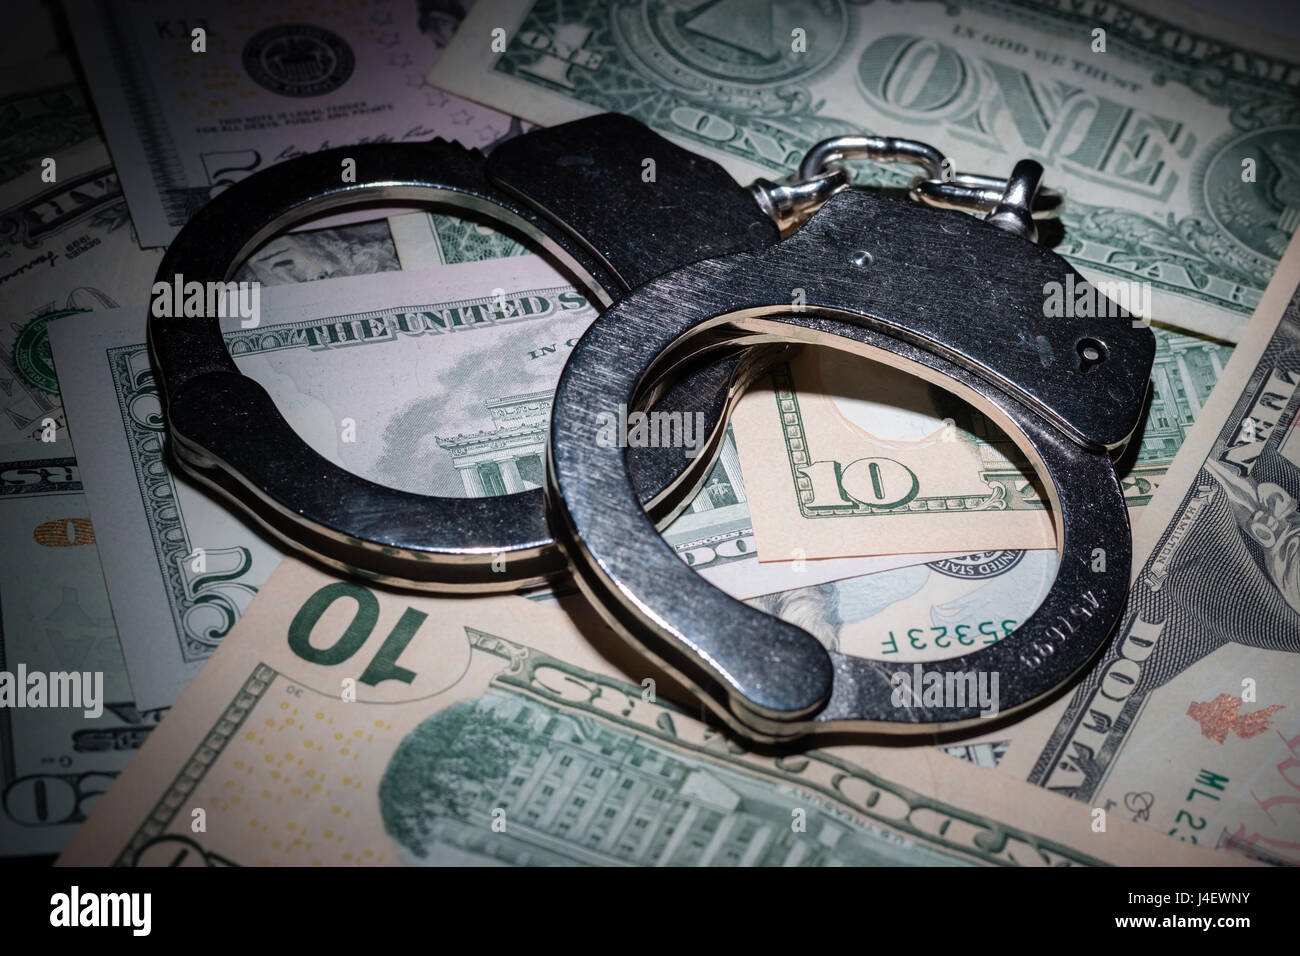 A pair of handcuffs on a pile of American banknotes Stock Photo